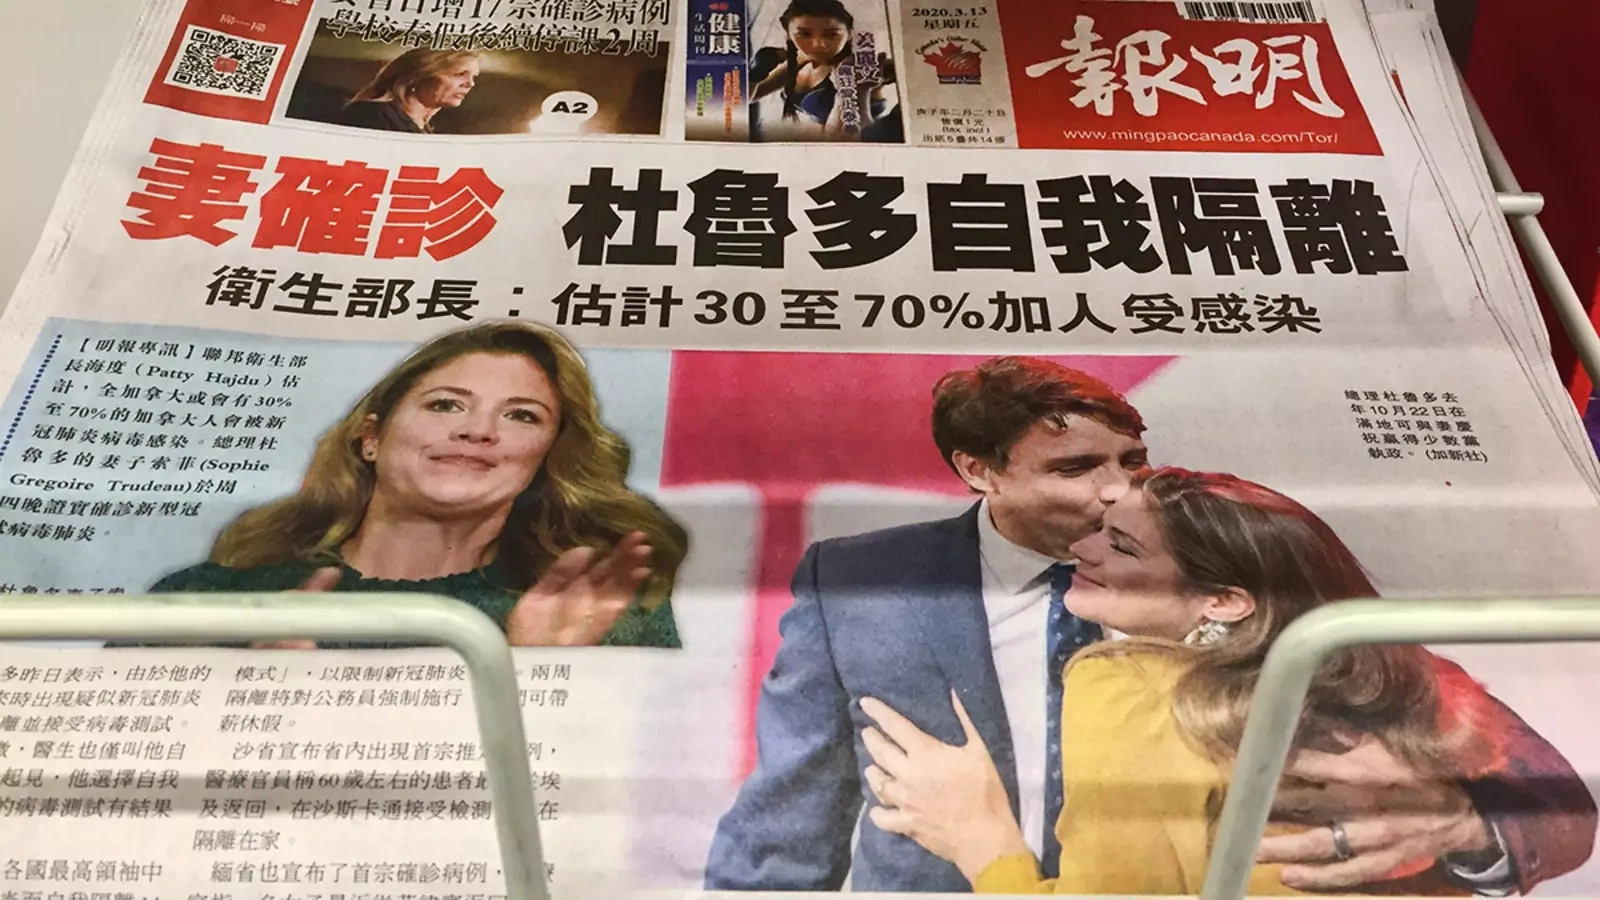 Chinese newspaper headline announcing that the wife of Canadian Prime Minister Justin Trudeau has been infected with COVID-19 on March 13, 2020, in Toronto, Canada.